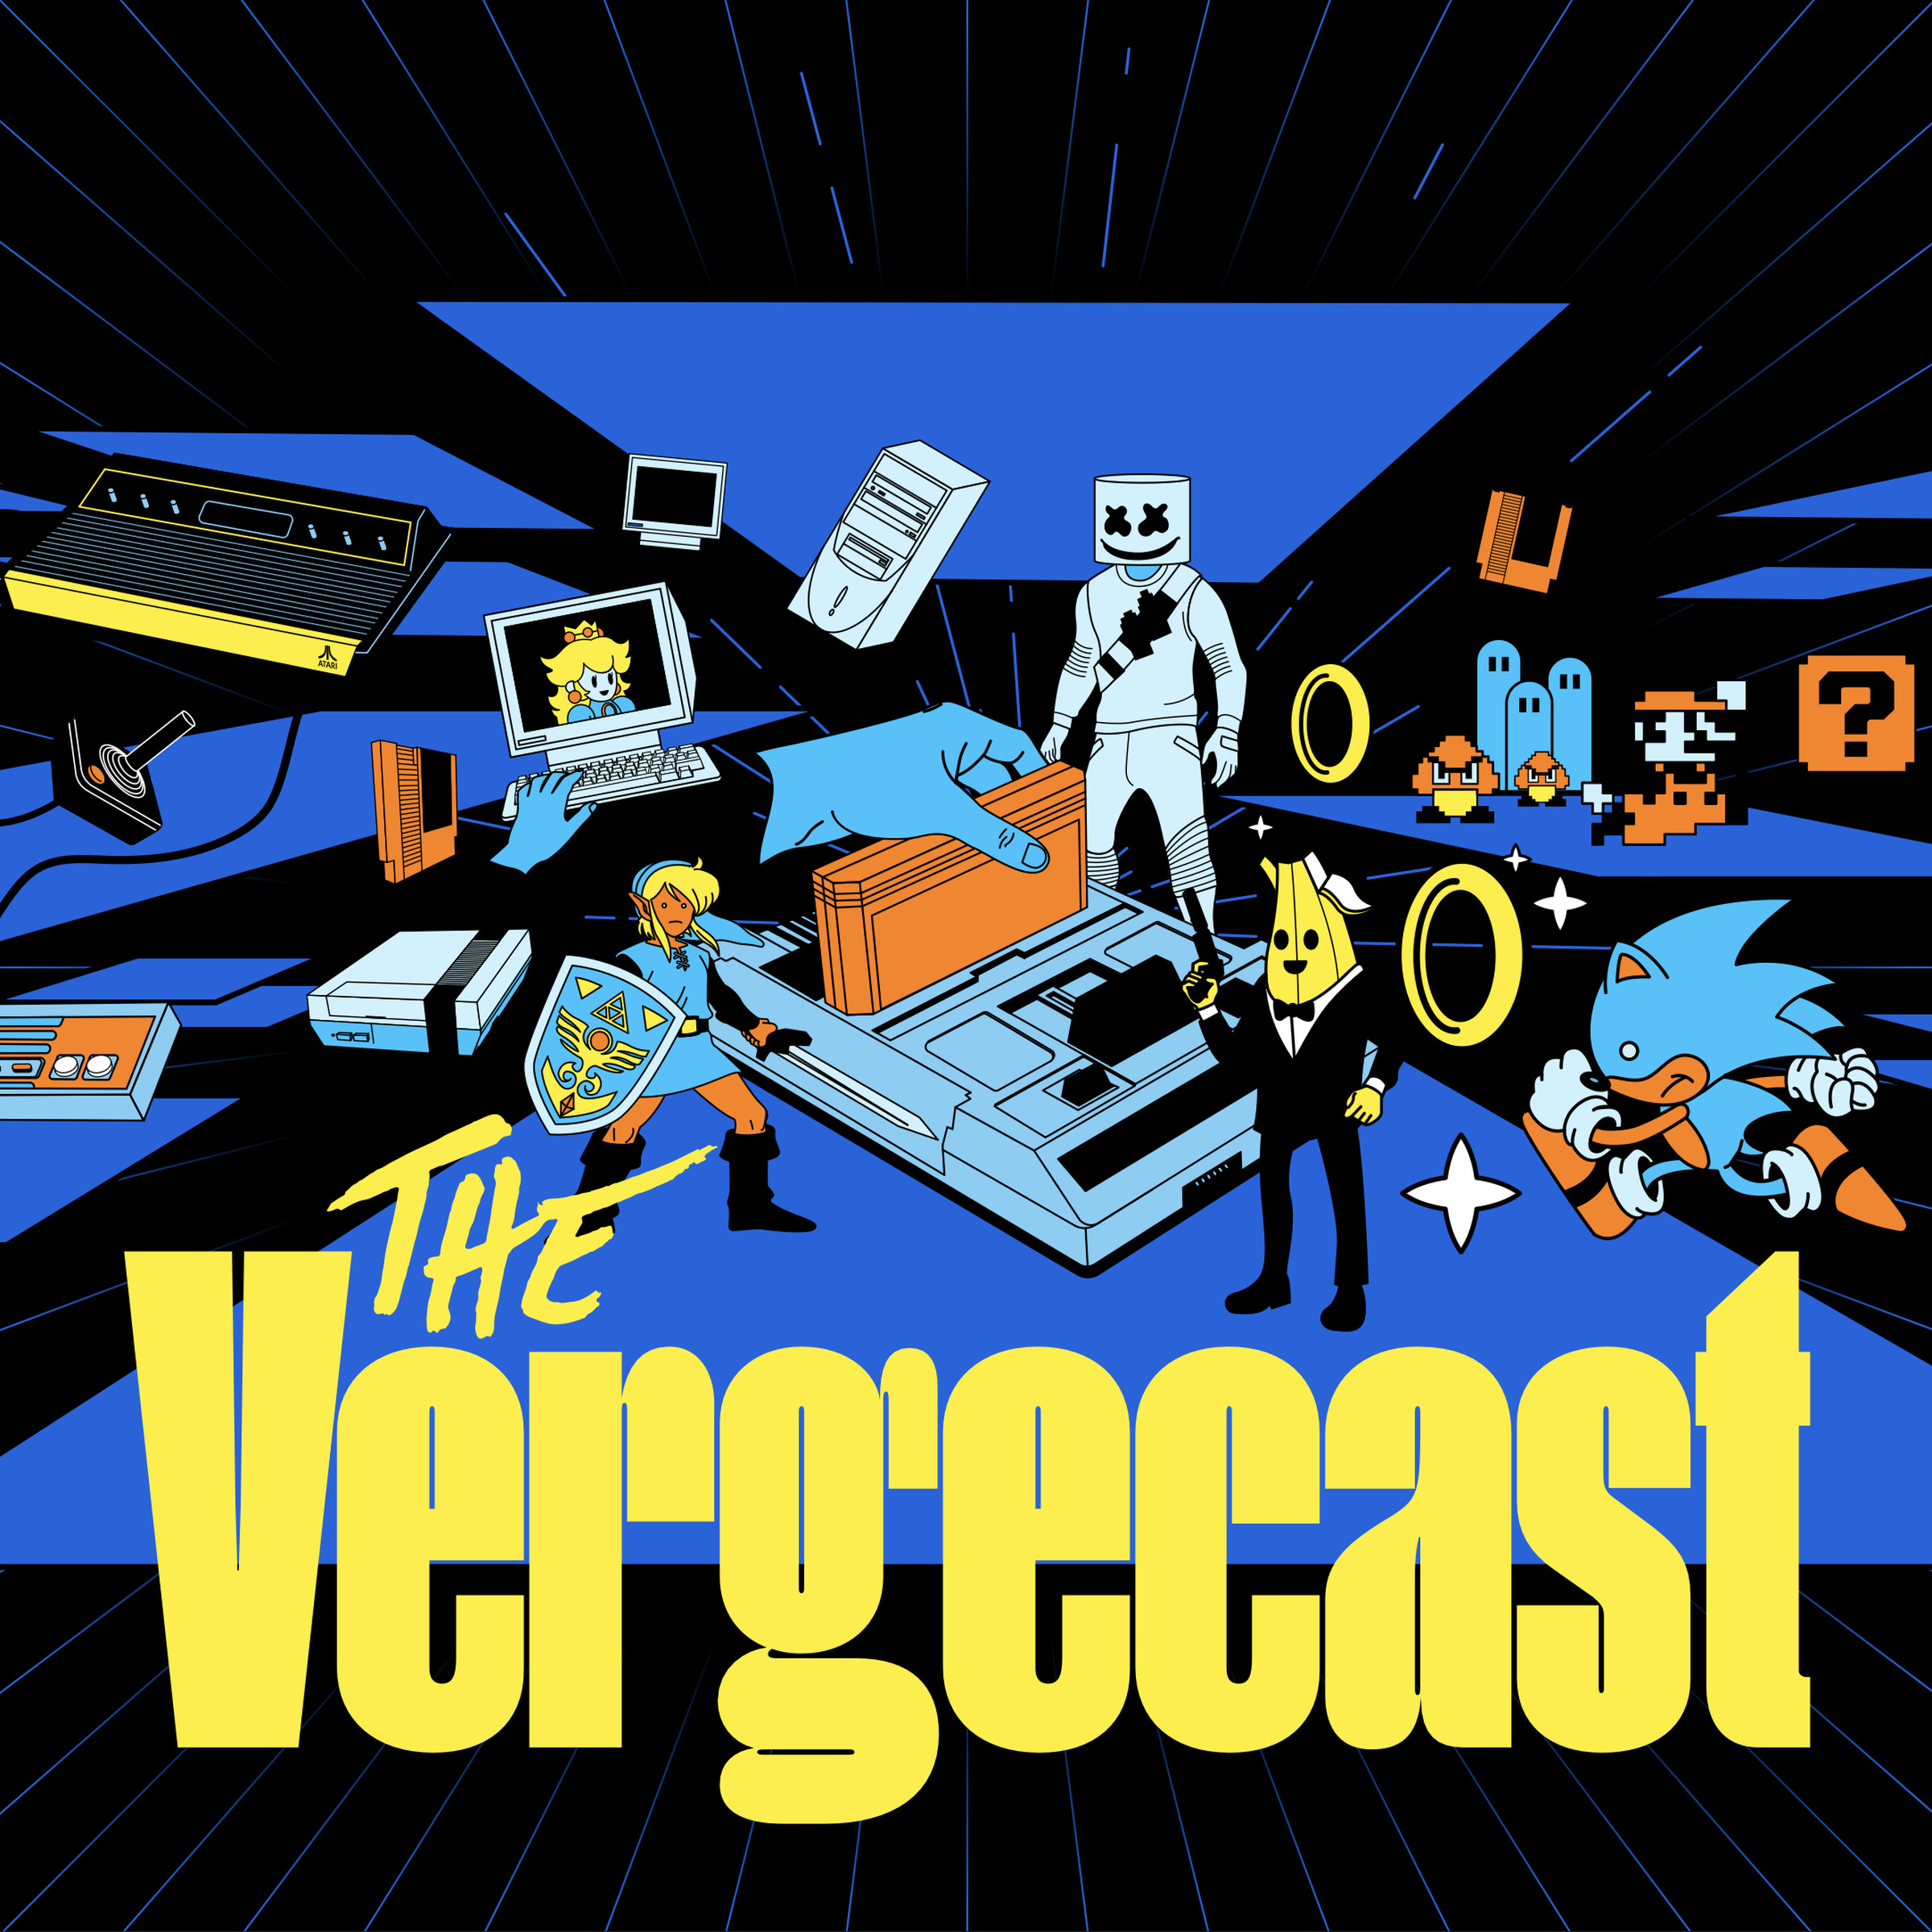 A stylized version of the Vergecast logo, showing old video games.